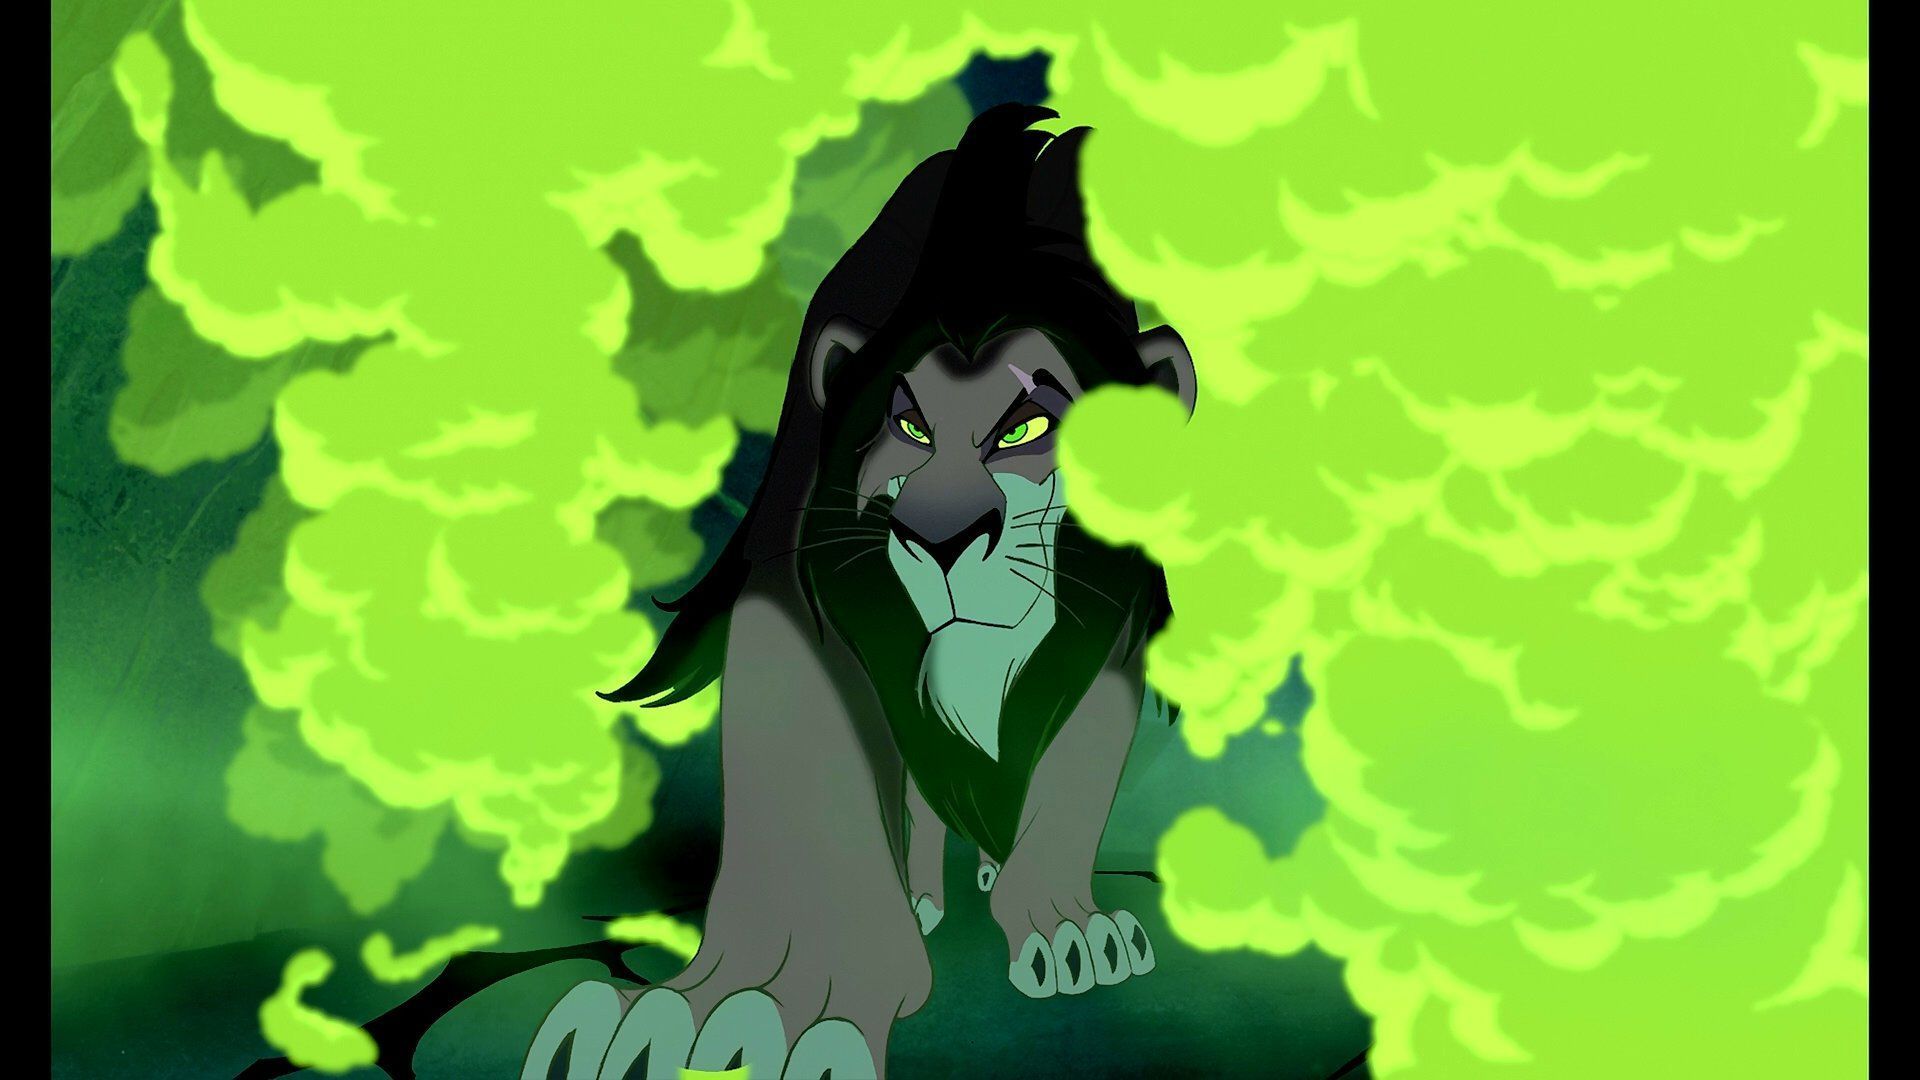 Scar with his eyes glowing green in the movie The Lion King - The Lion King